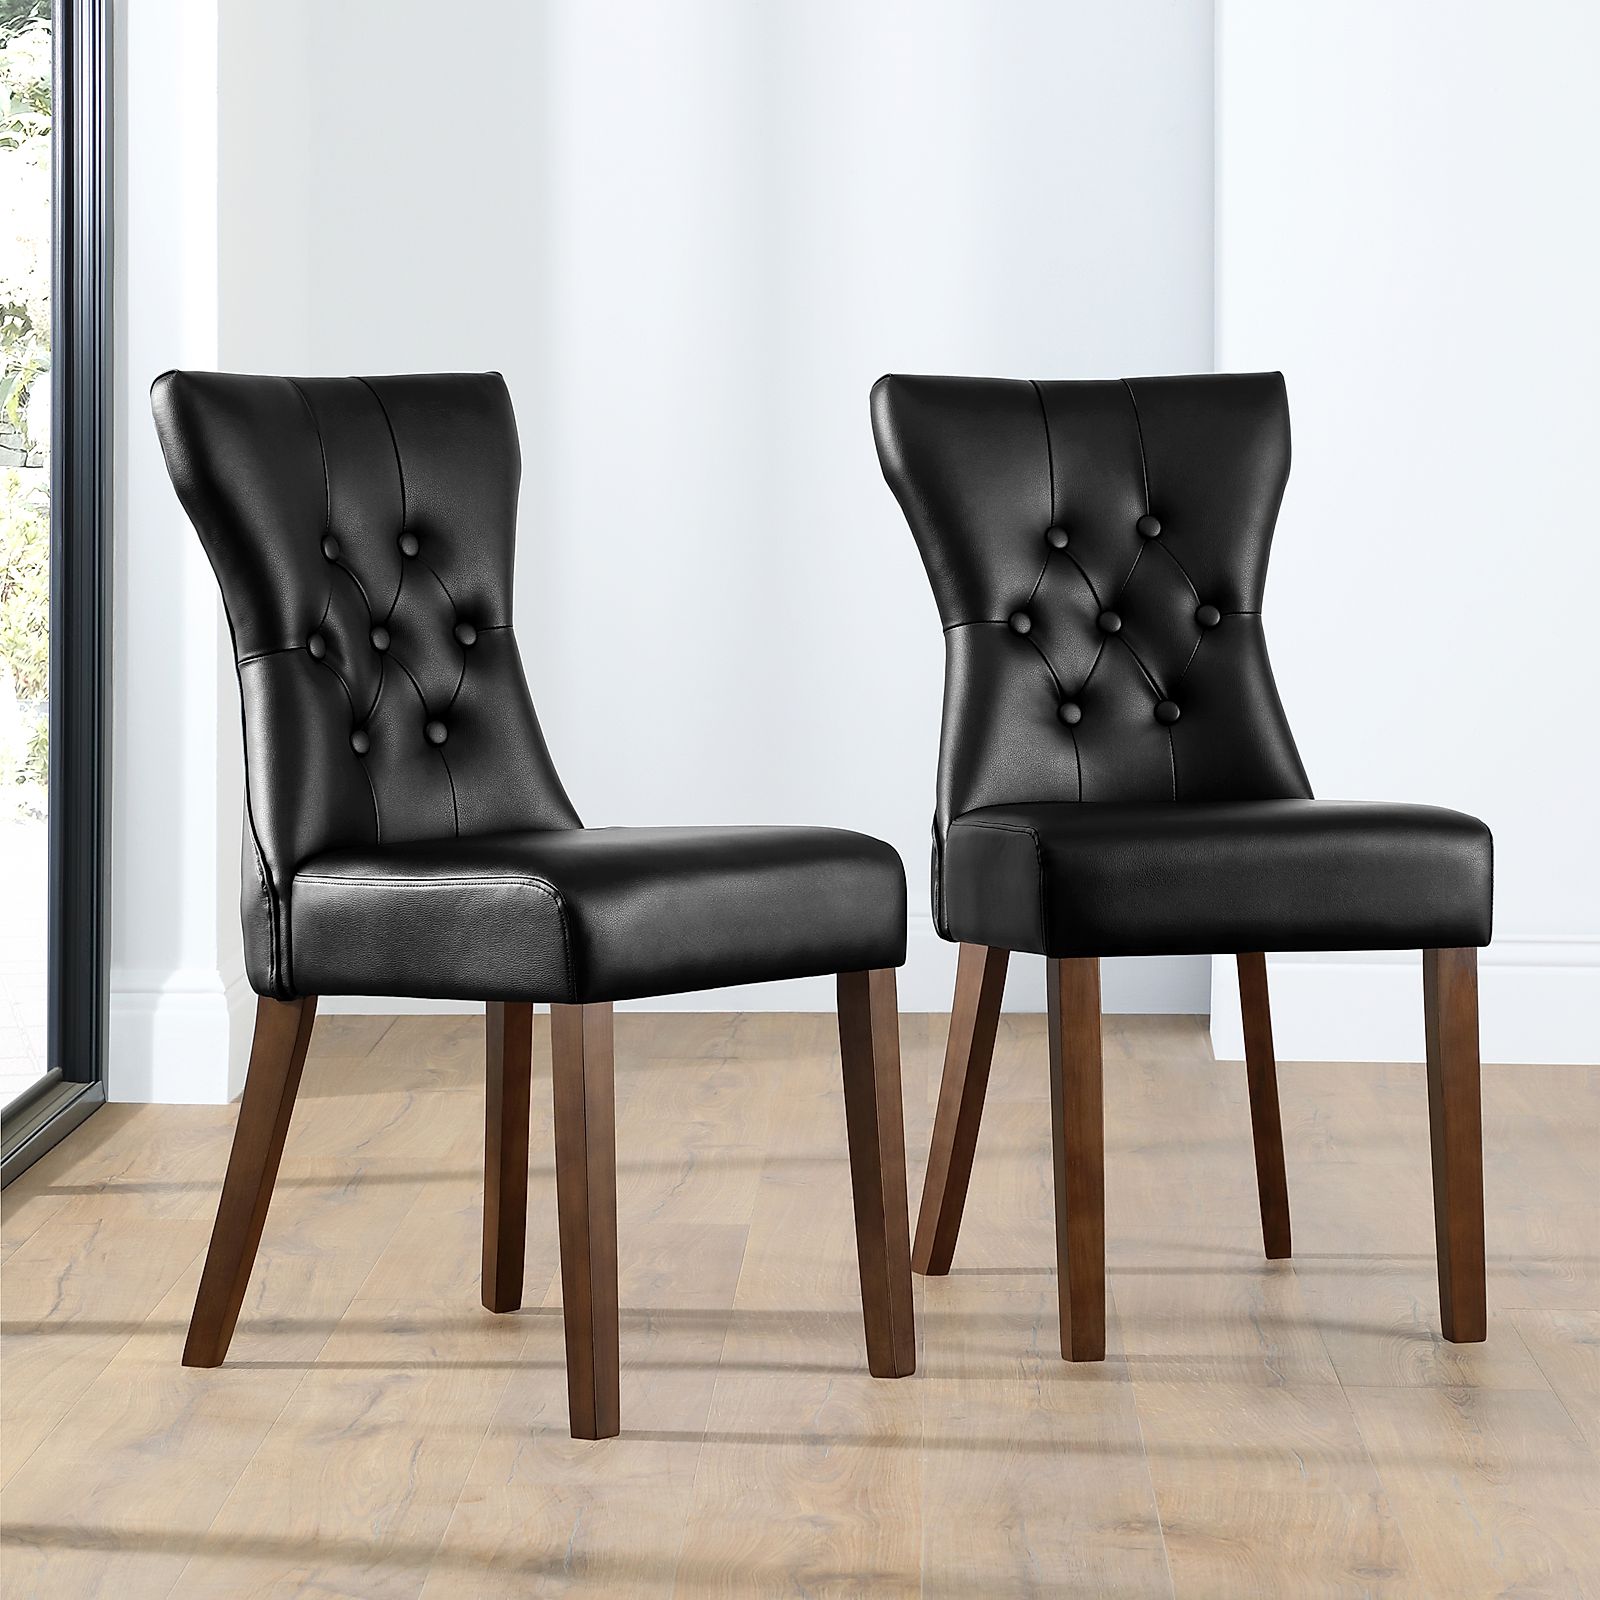 Black Dining Room Chairs Baxton Studio Darcell Modern And Contemporary Black Faux Leather